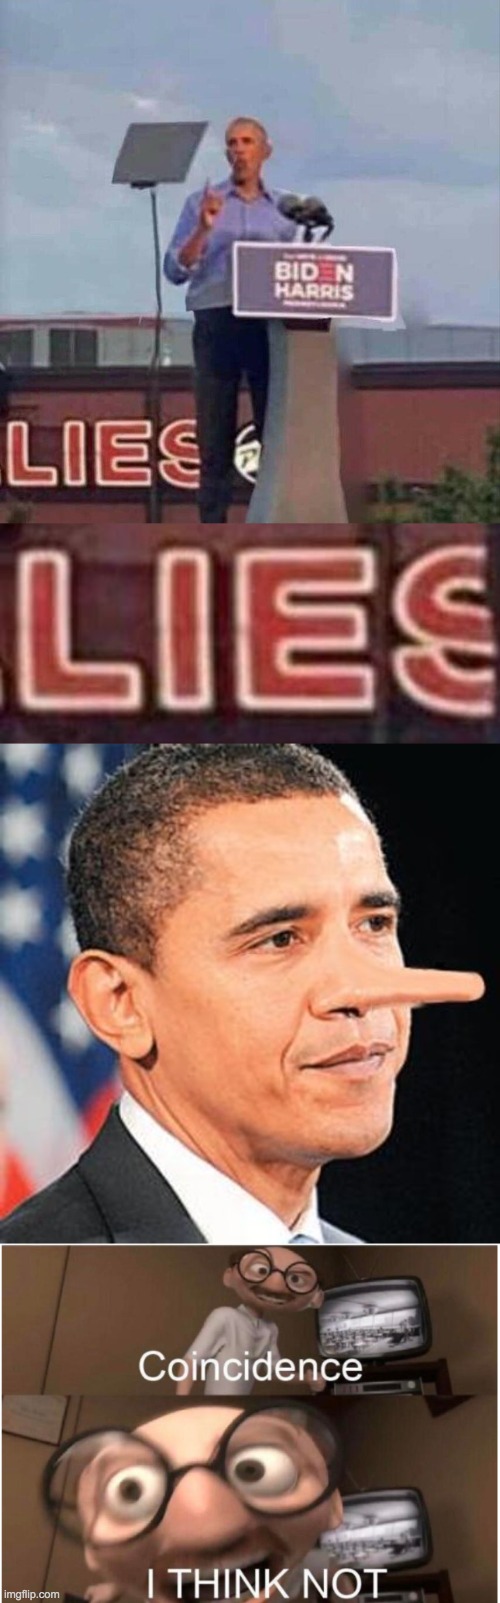 When reality confirms you are a liar | image tagged in coincidence i think not,funny,memes,politics,obama,joe biden | made w/ Imgflip meme maker